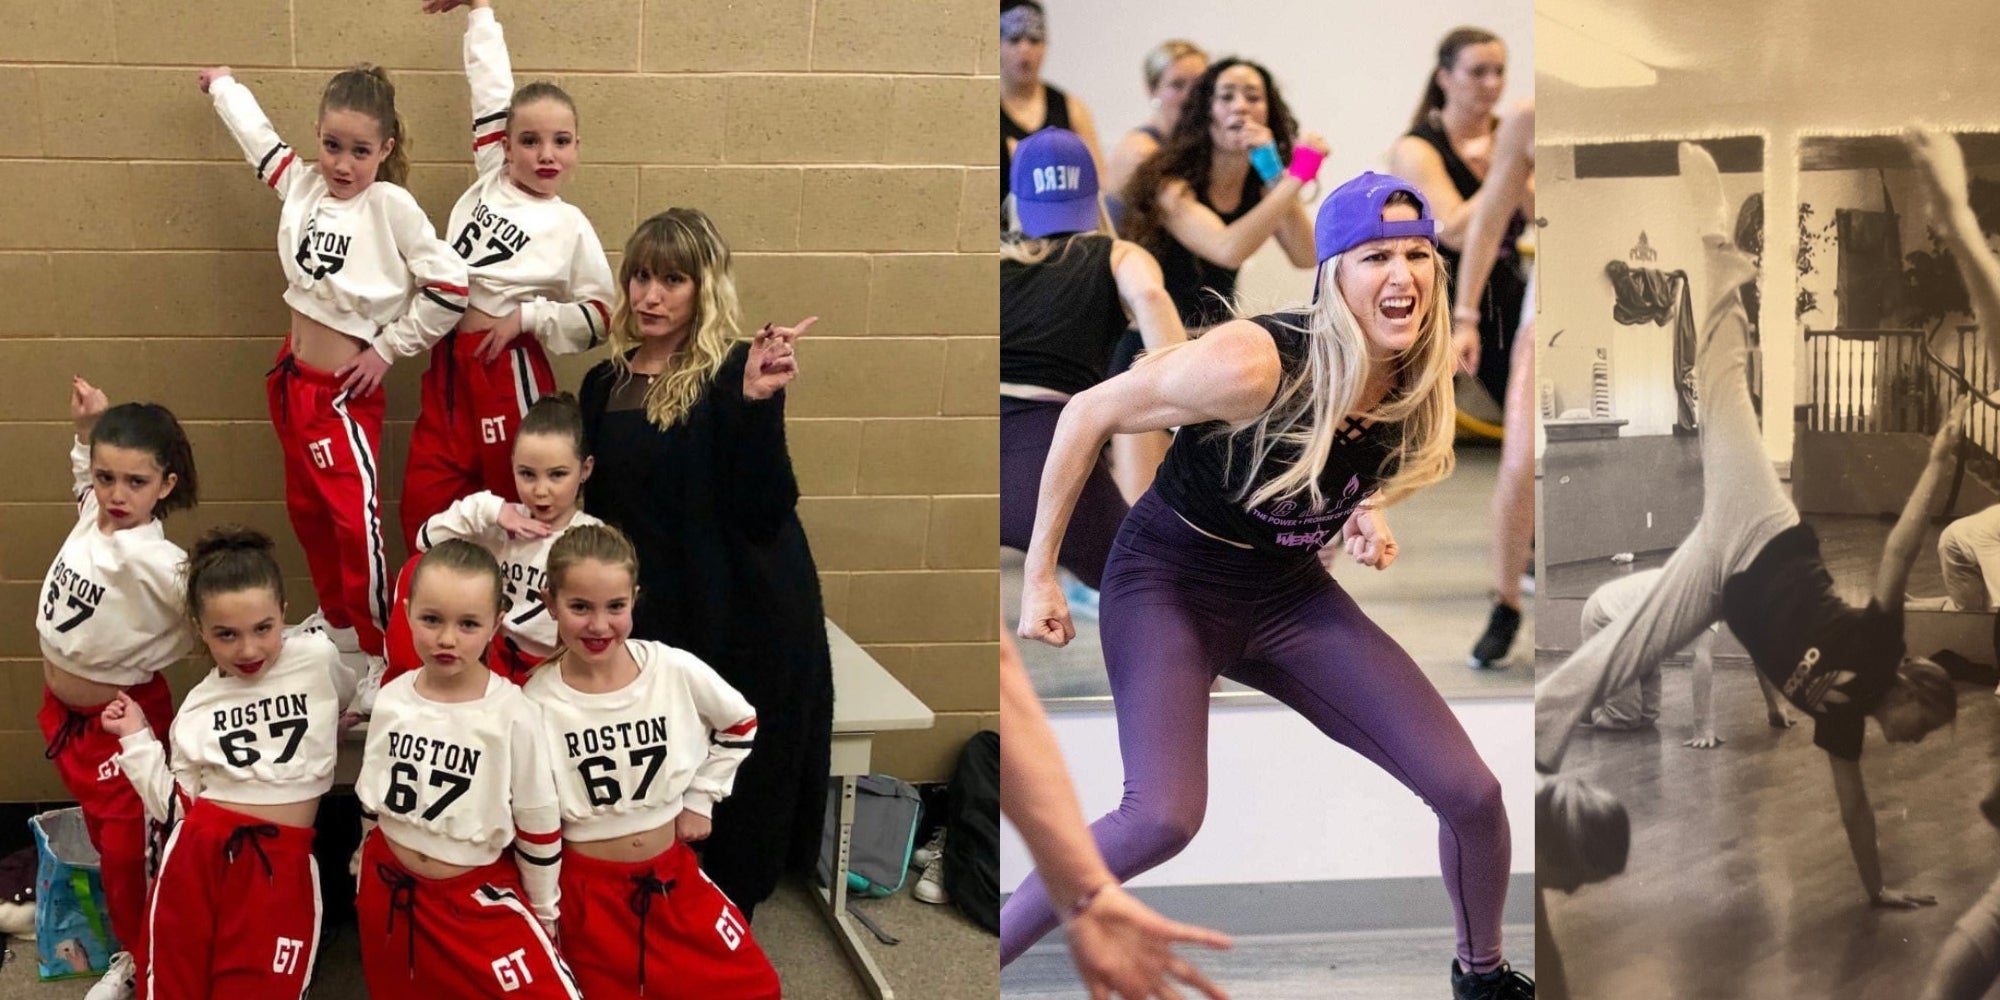 Three pictures of Jenny, one with her students